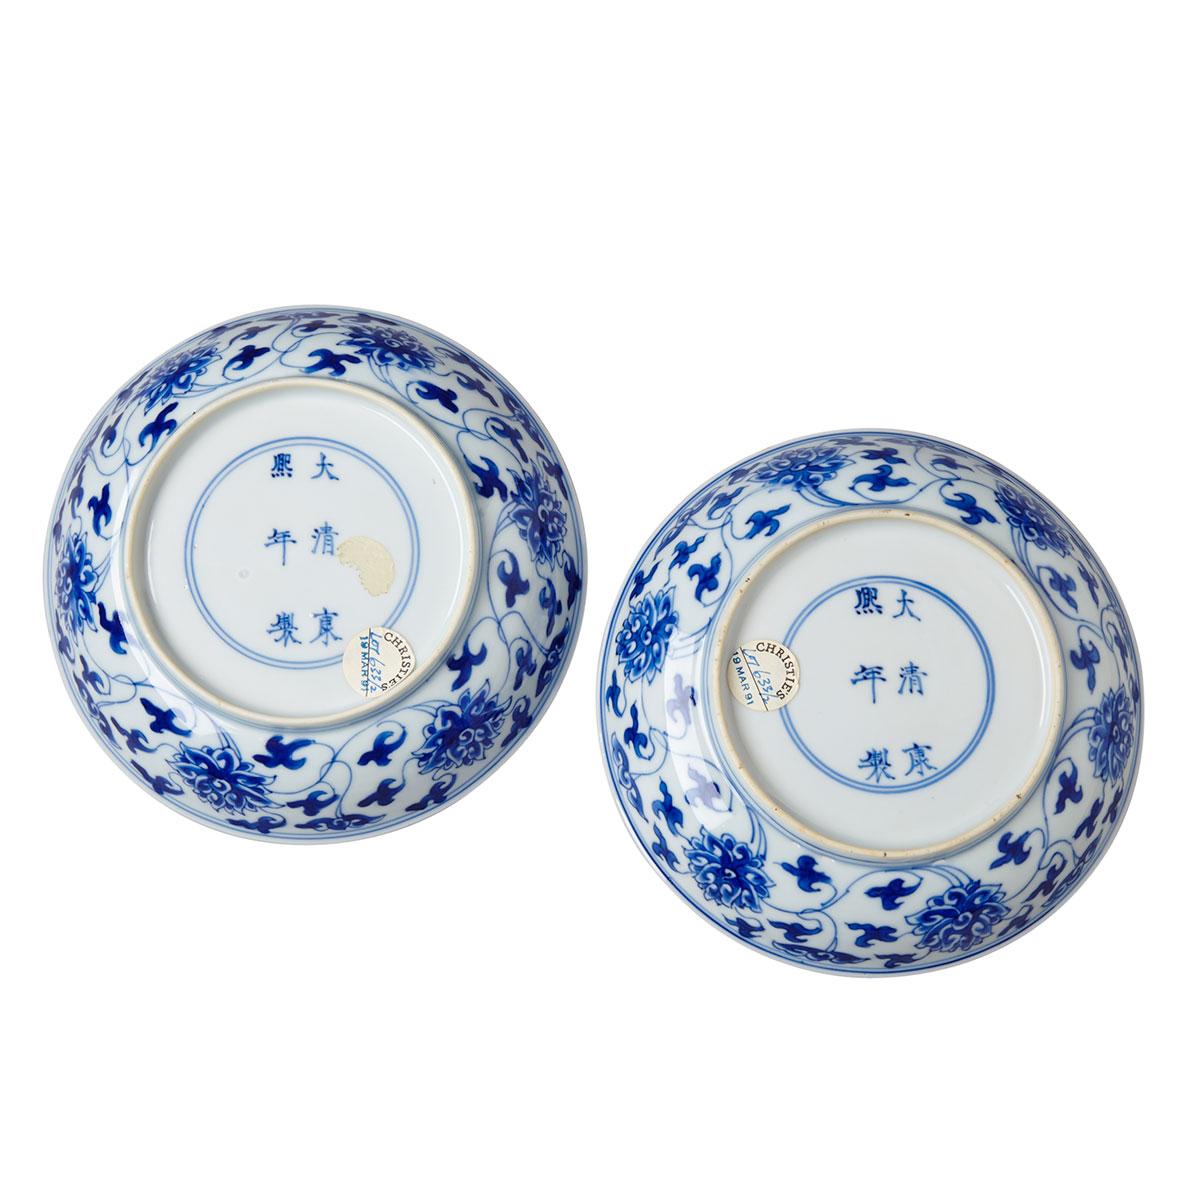 Pair of Blue and White Dishes, Kangxi Mark and Period (1662-1722)